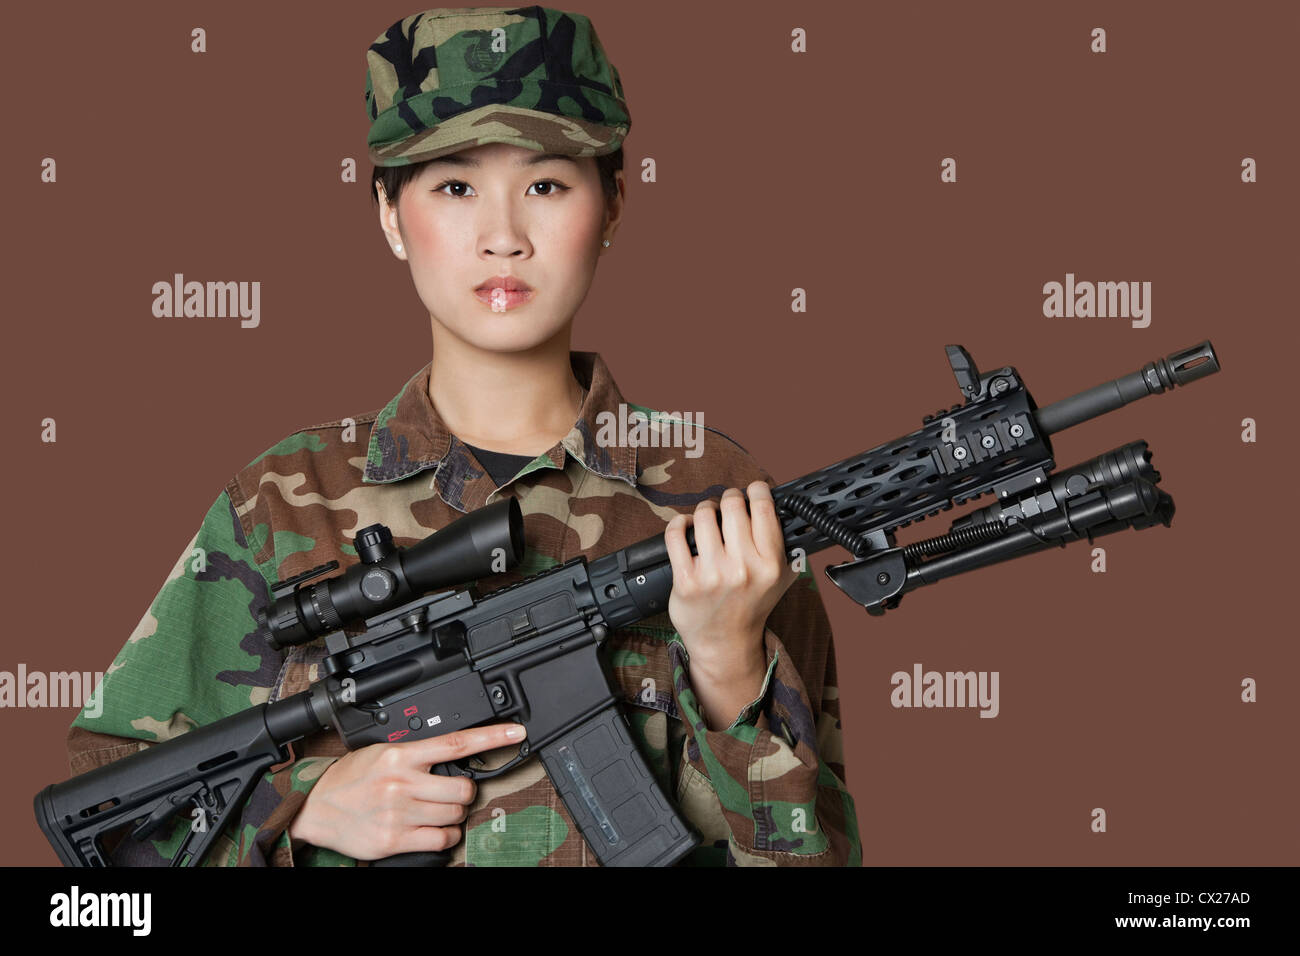 Portrait of beautiful young US Marine Corps soldier with M4 assault rifle over brown background Stock Photo